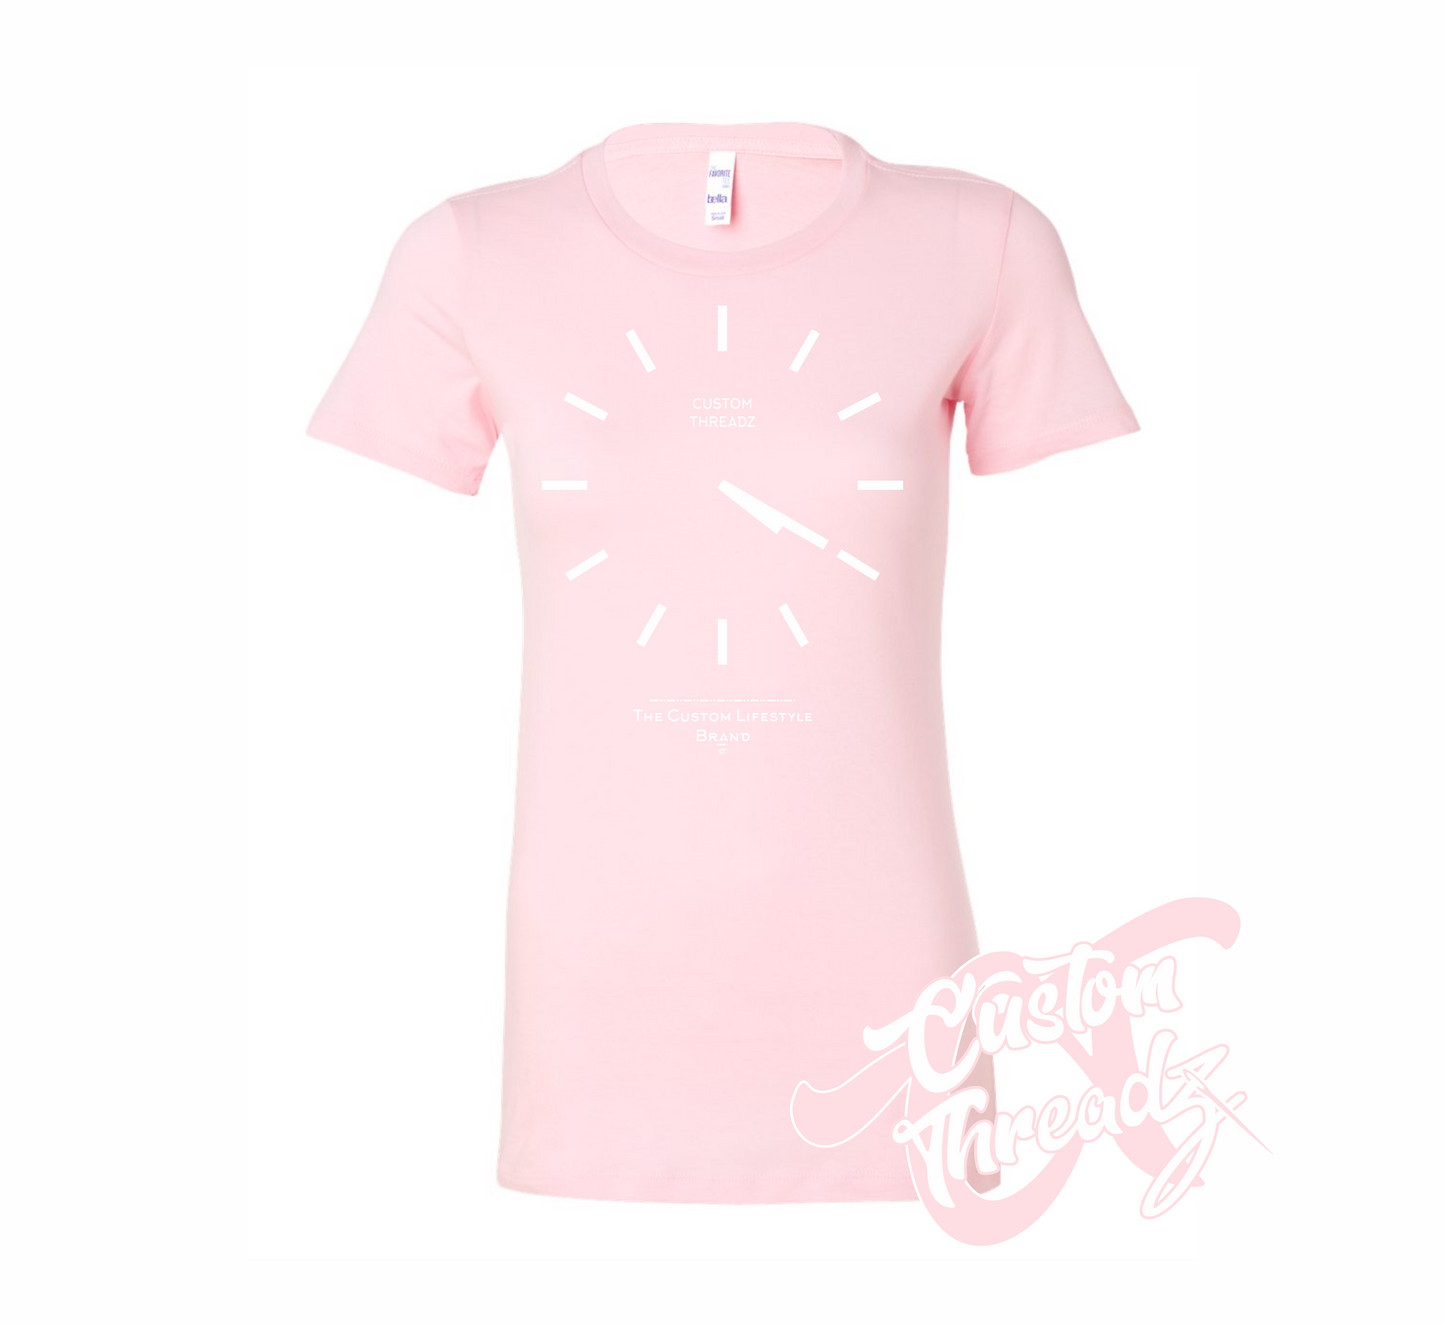 light pink womens tee with basic analog clock set to 4 20 DTG printed design